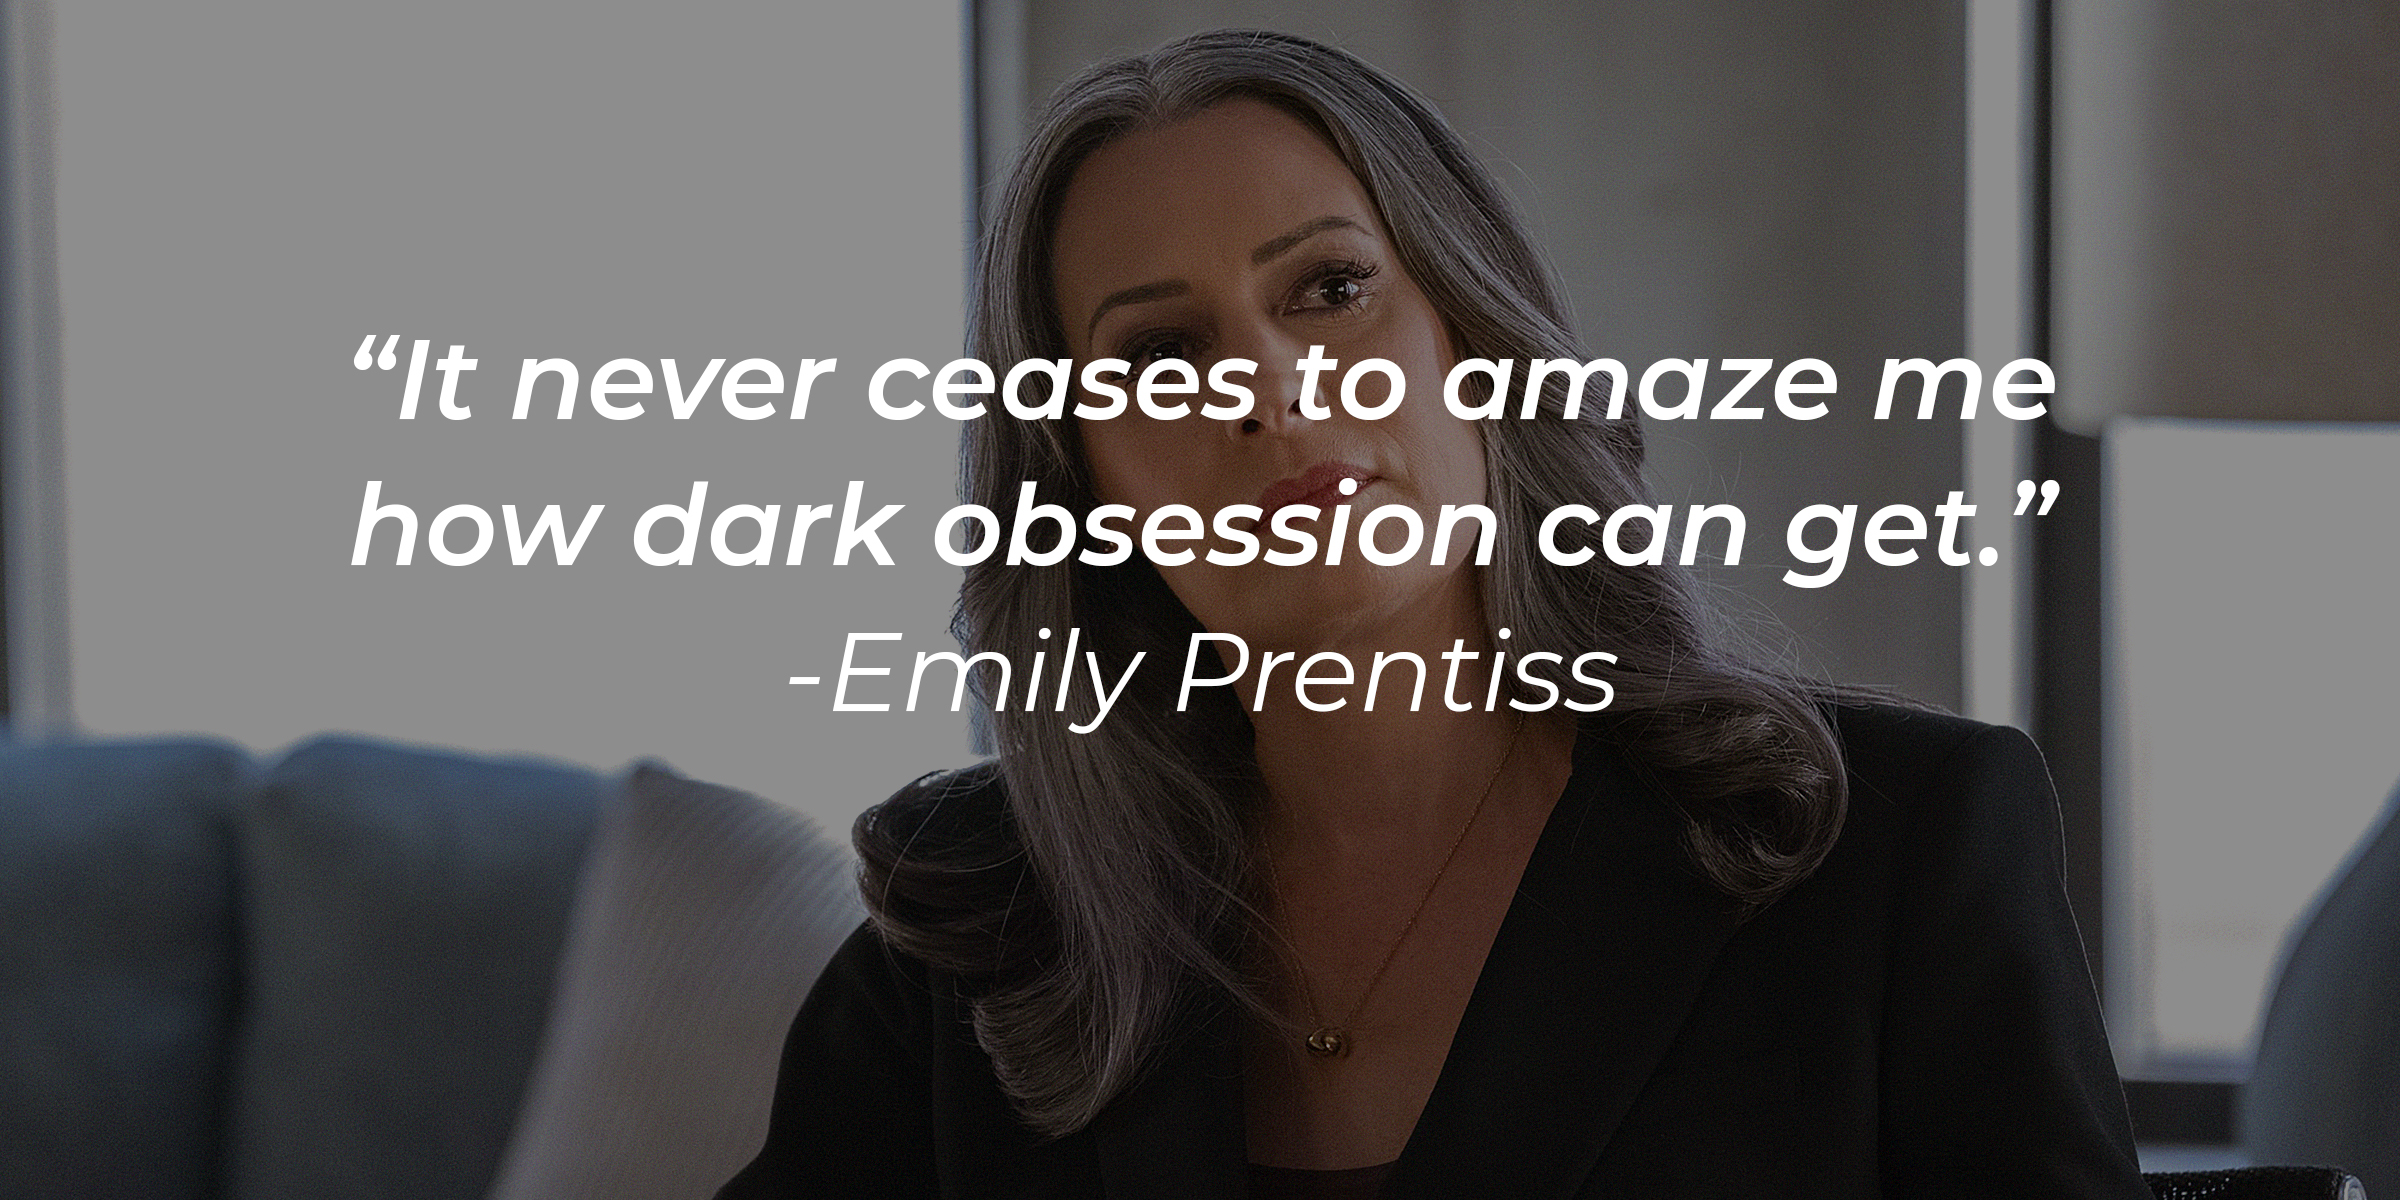 Photo of Emily Prentiss with the quote: "It never ceases to amaze me how dark obsession can get." | Source: Facebook.com/CriminalMinds